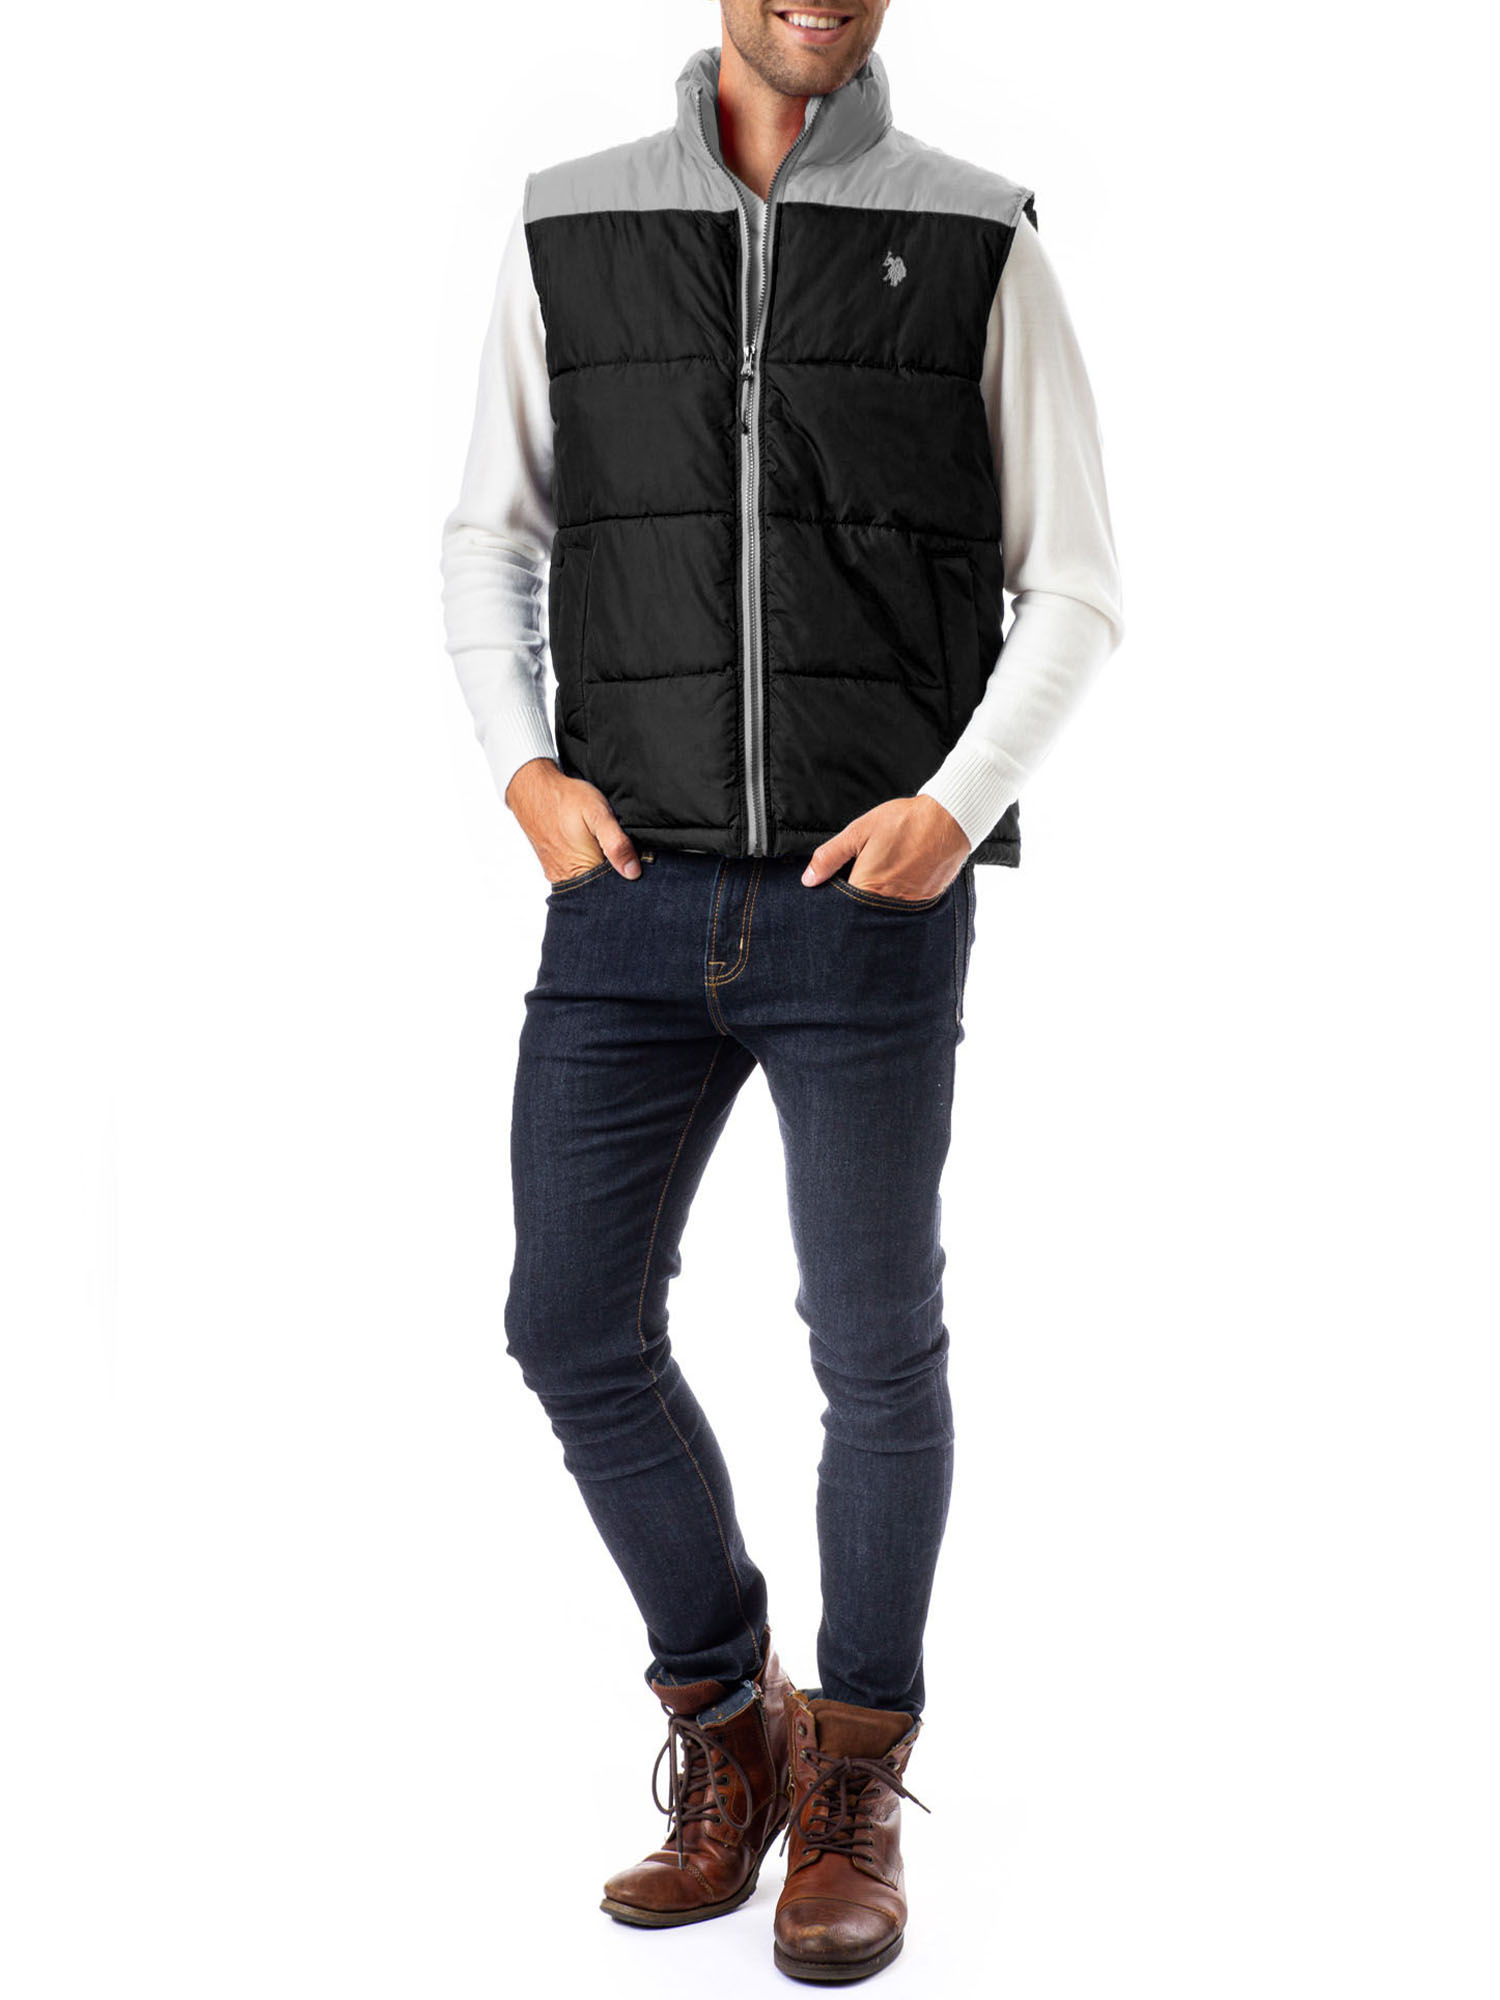 U.S. Polo Assn. Puffer Vest - image 2 of 5